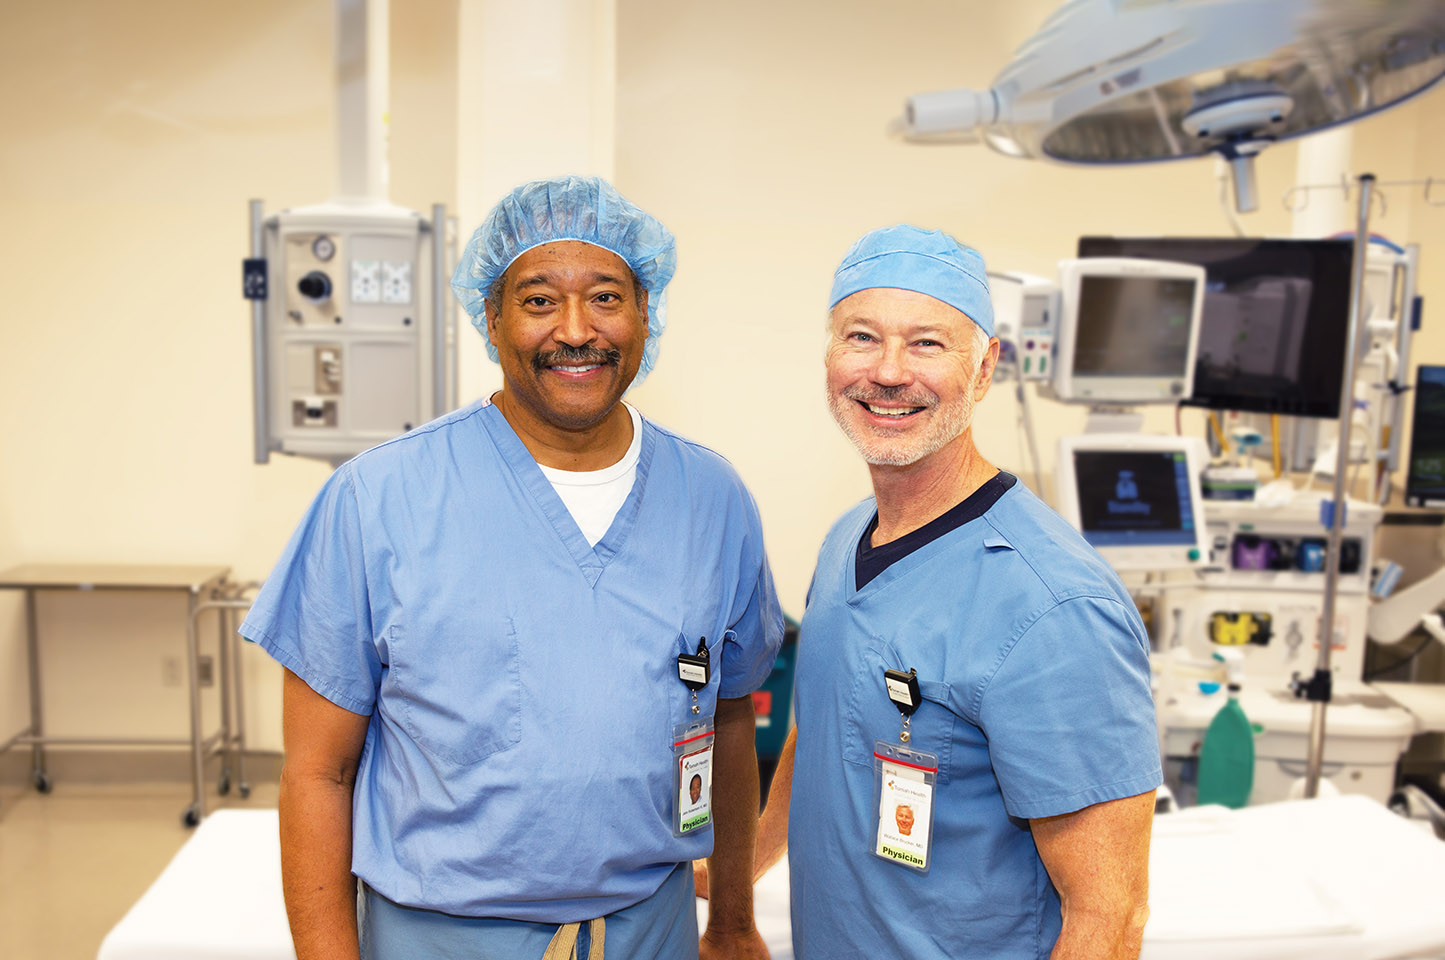 Dr. John Robertson, III, MD and Dr. Wallace Brucker, MD smile at the camera in the Tomah Health surgical suite. Both provide expert surgical care, close to home.